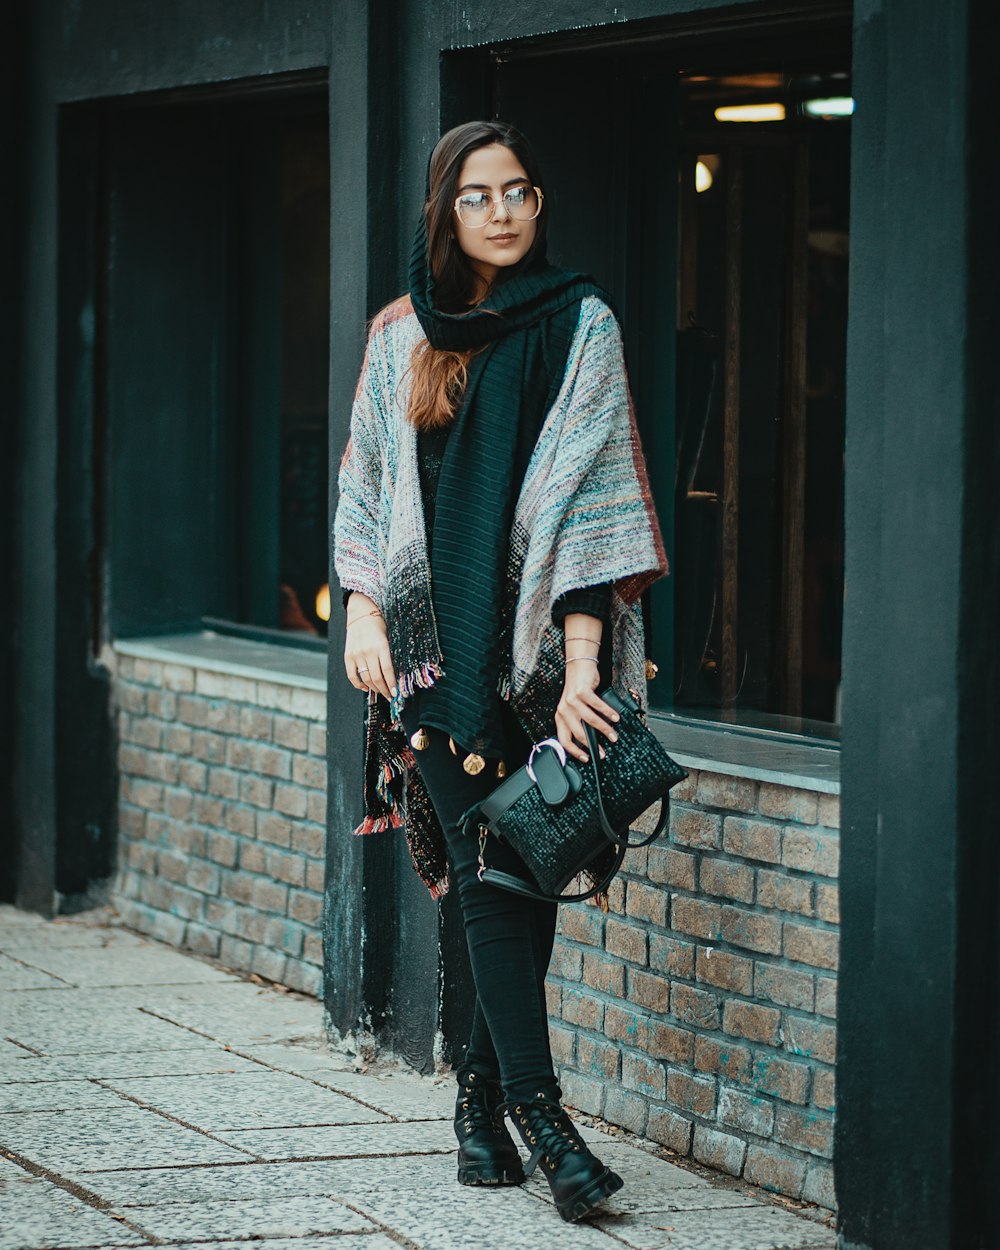 woman in black and white long sleeve shirt and black pants standing on sidewalk during daytime